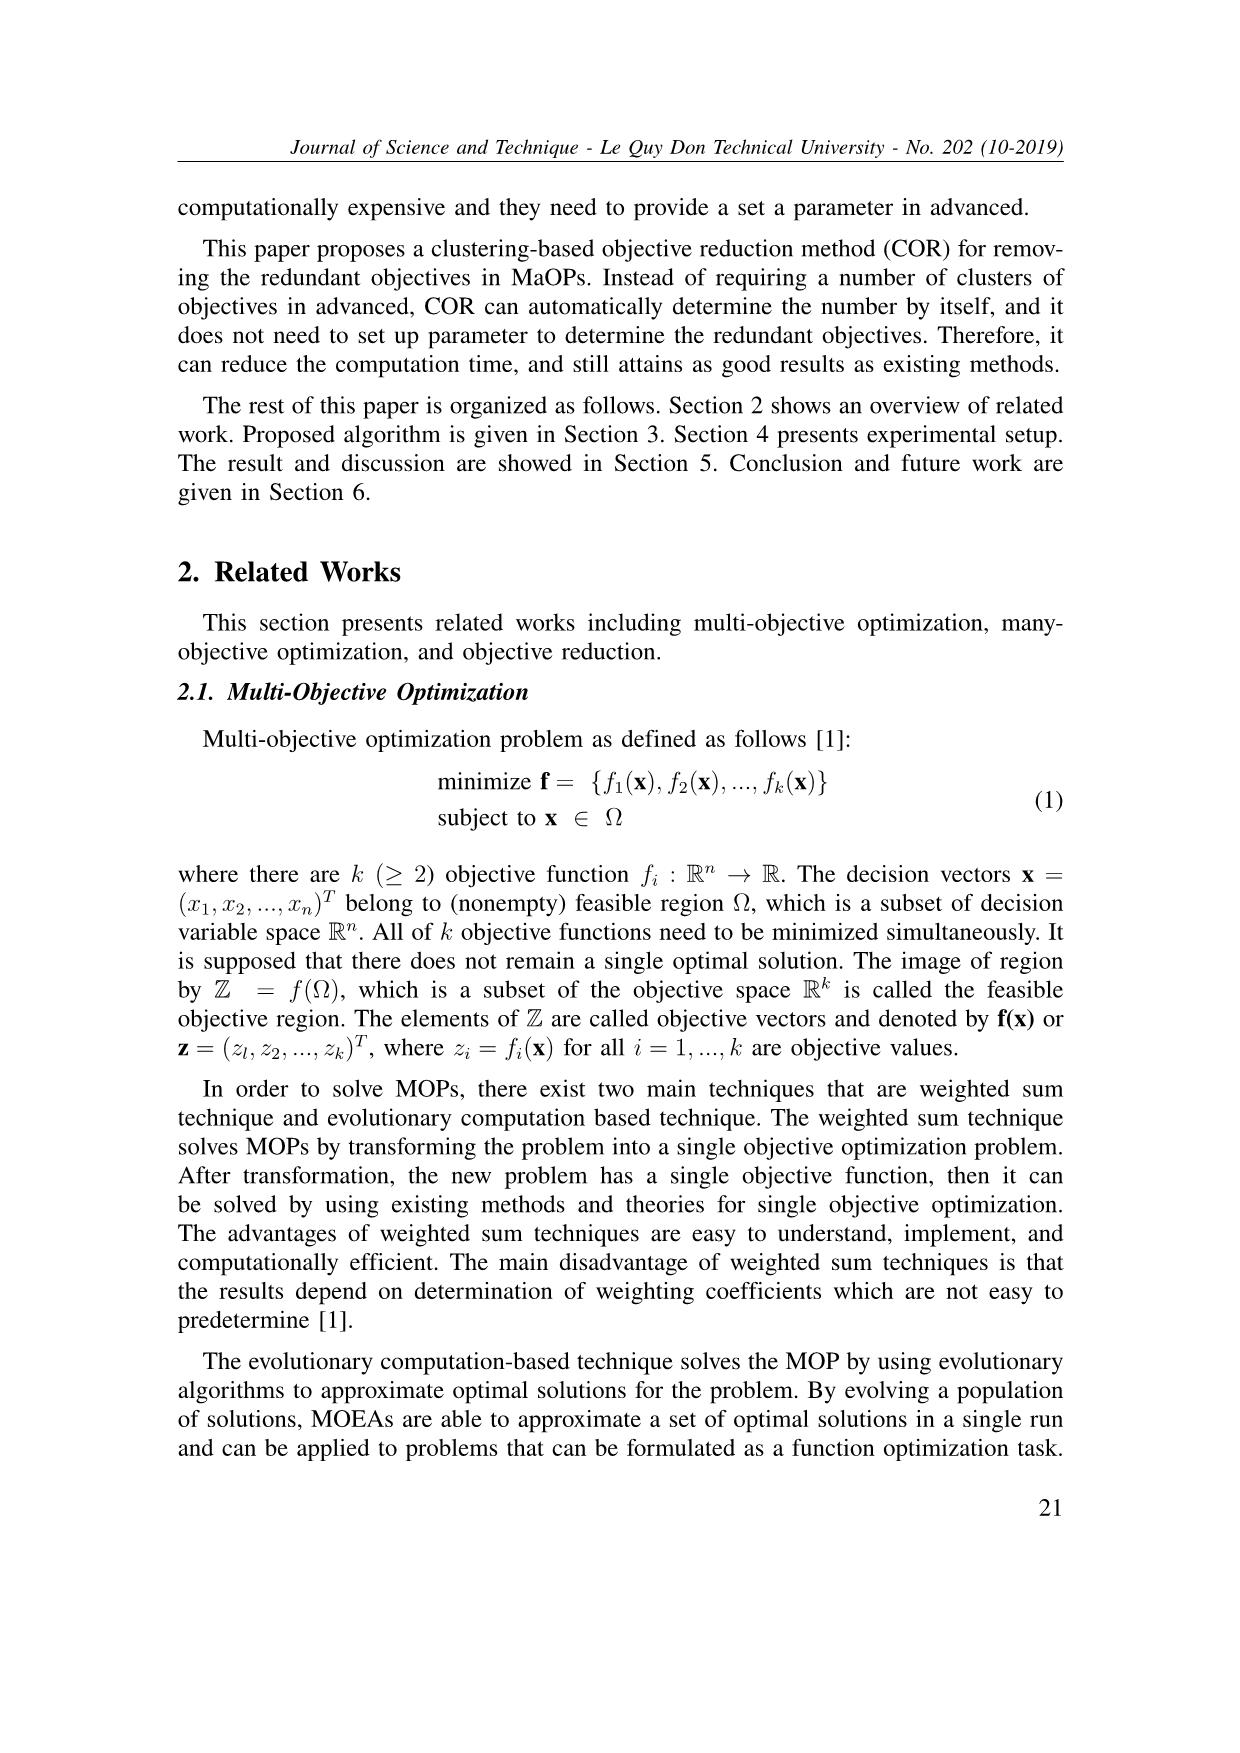 An improvement of clustering-based objective reduction method for many-objective optimization problems trang 3